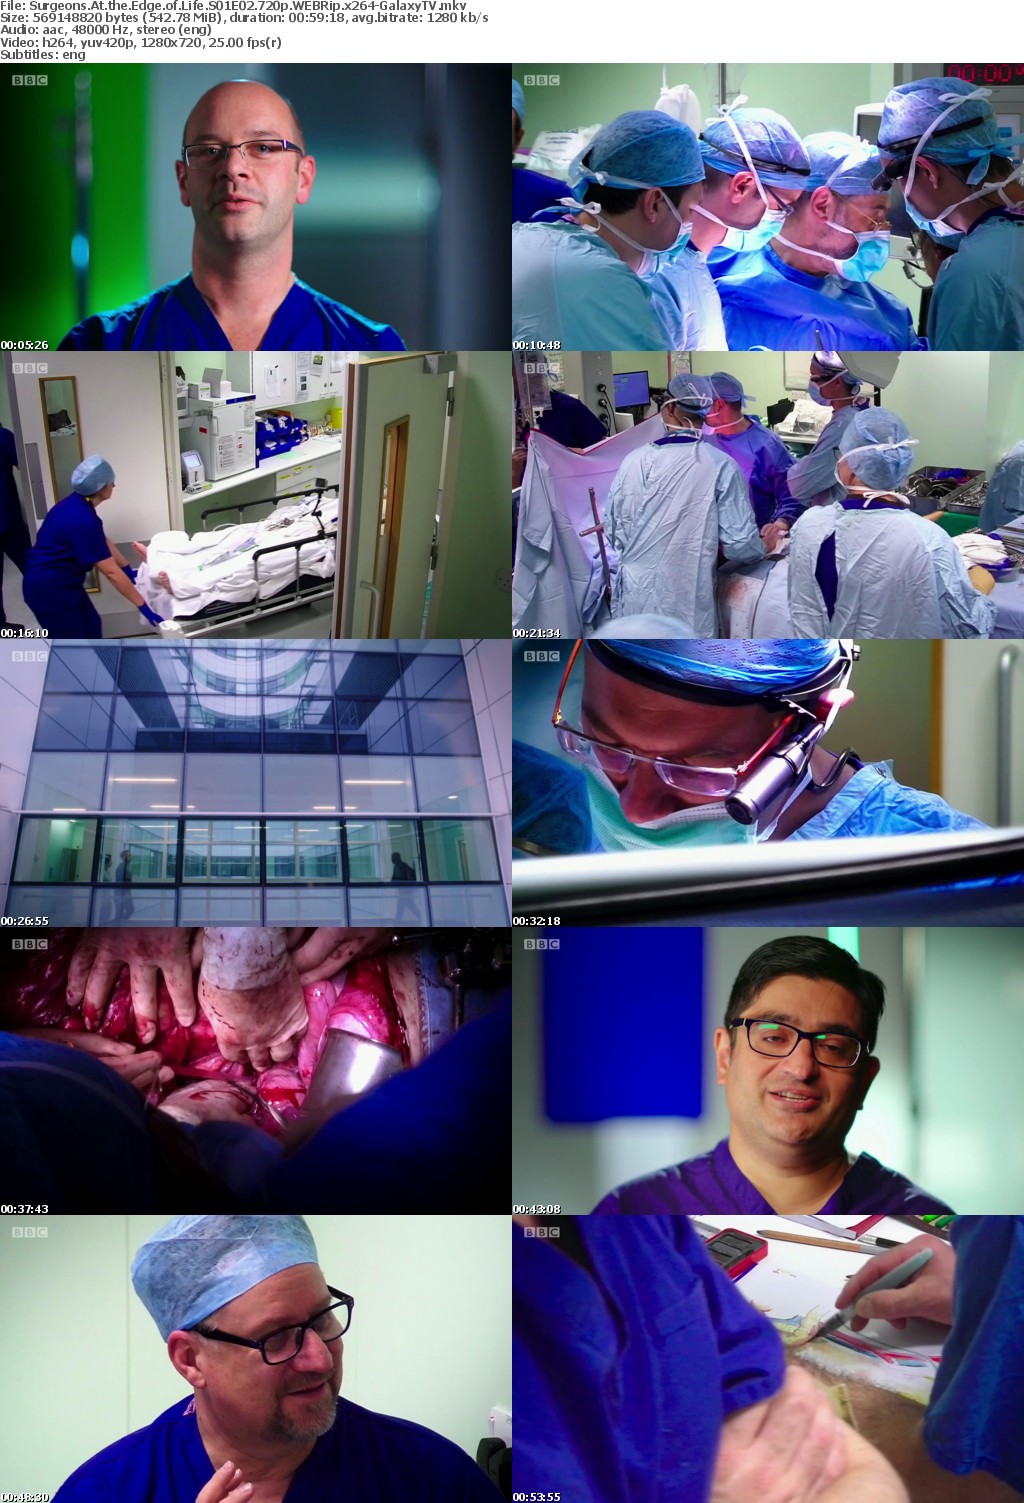 Surgeons At The Edge Of Life S01 COMPLETE 720p WEBRip x264-GalaxyTV